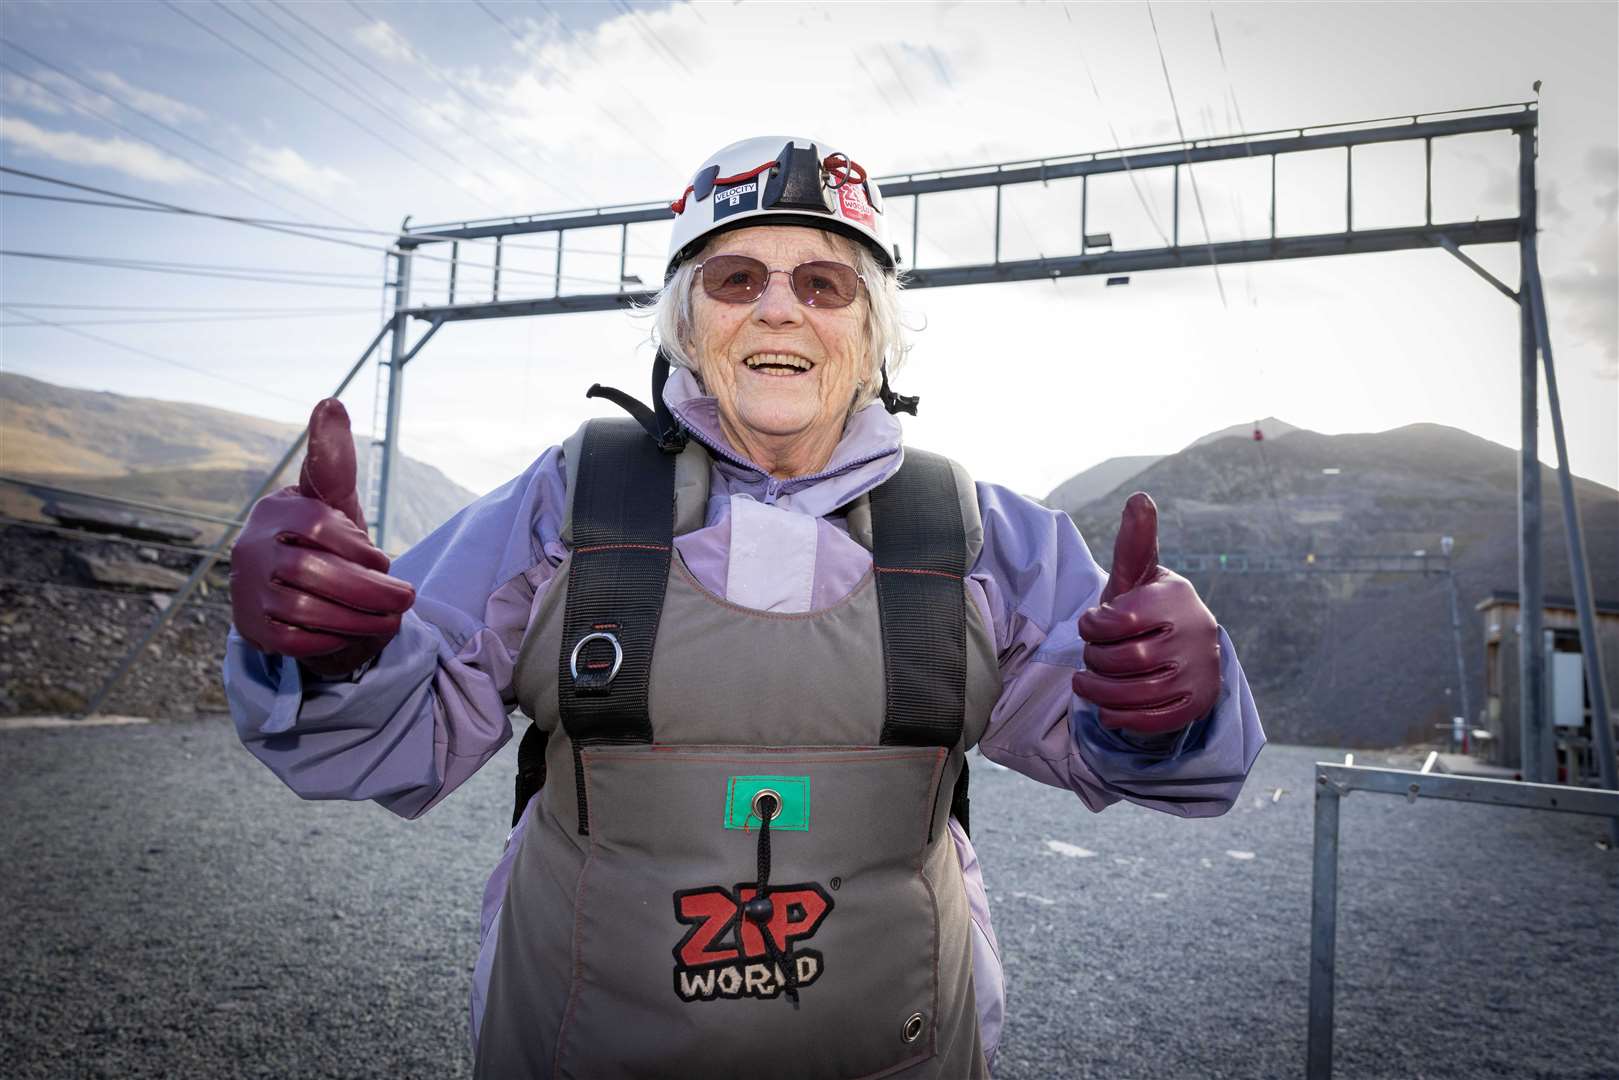 Ms Webster gives a thumbs up after her daring zipline over Penrhyn Slate Quarry in North Wales (Care UK/ Darren Robinson)